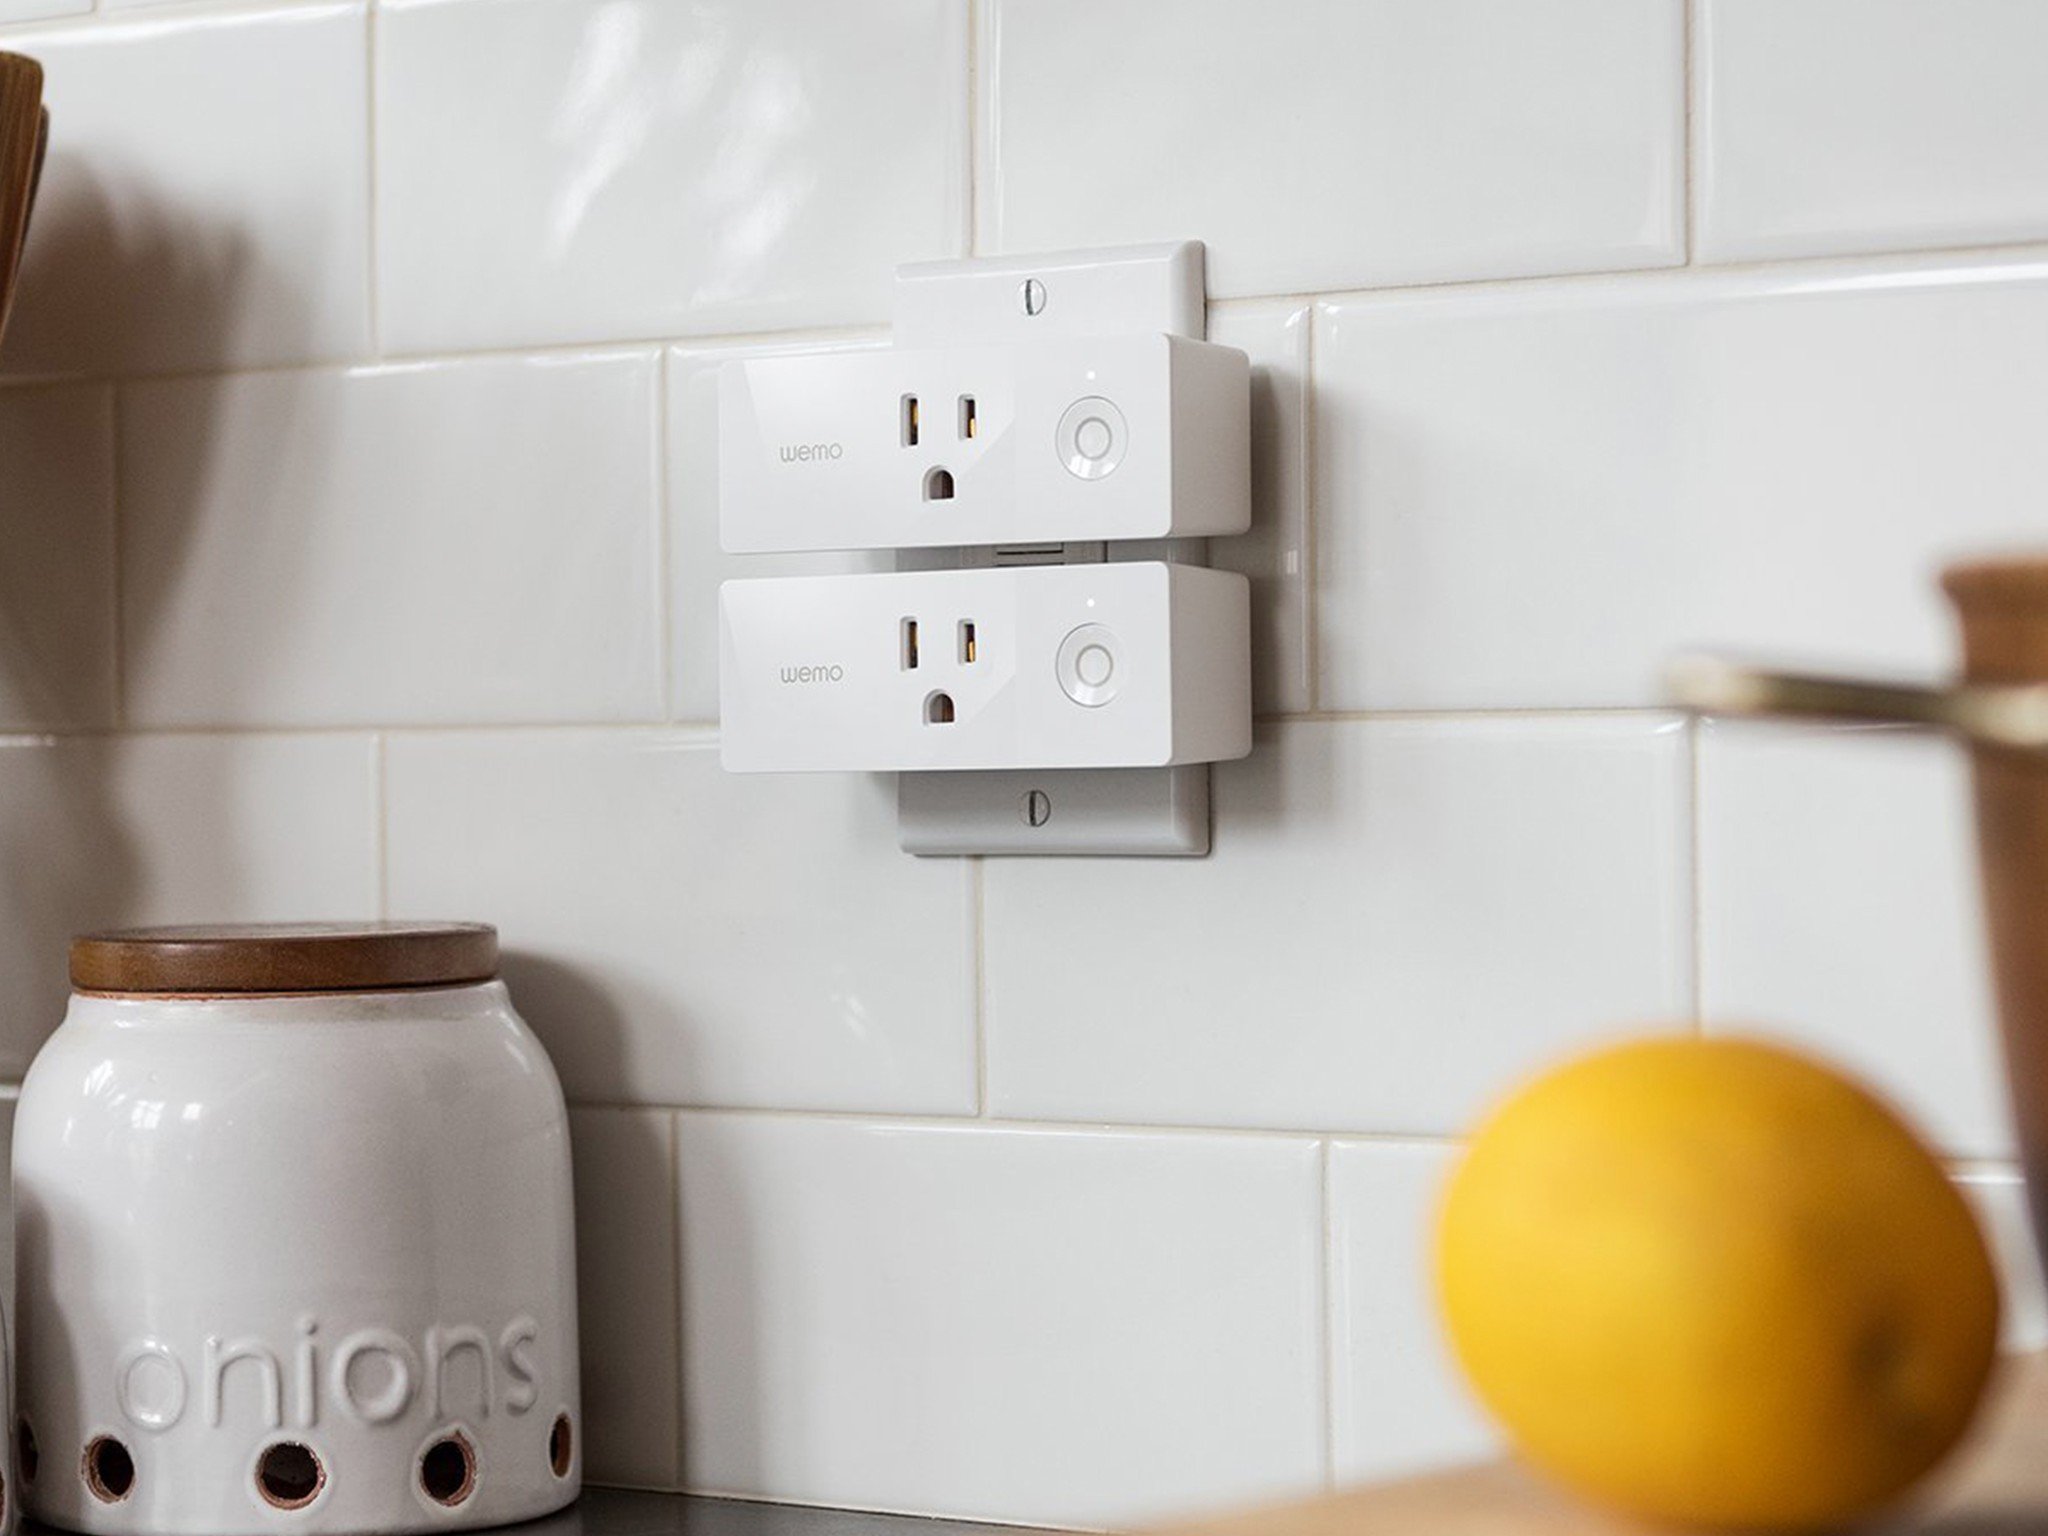 Control everything you own with this $25 Wemo mini smart plug